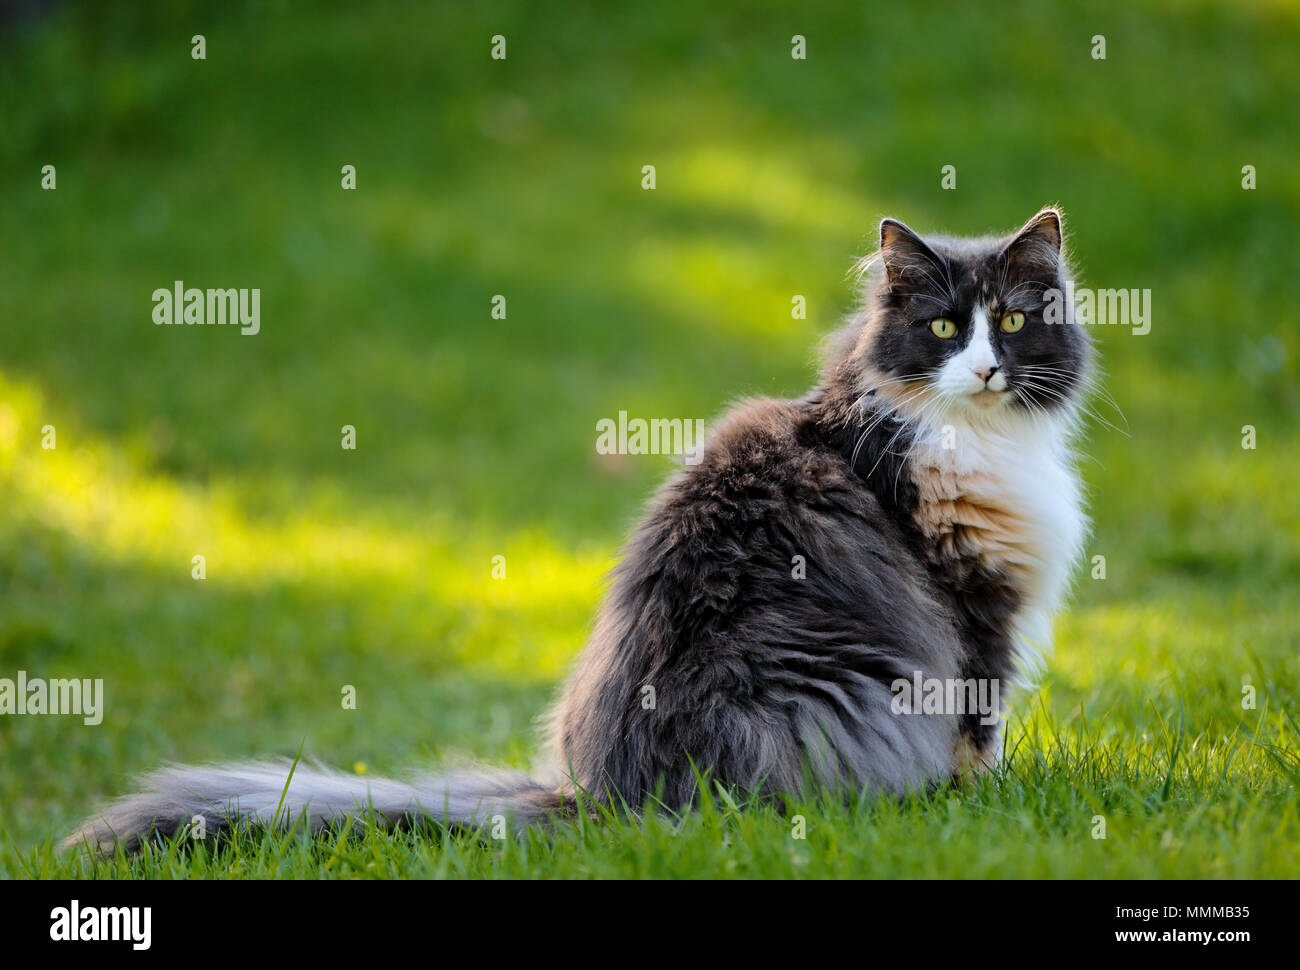 Norwegian forest cat sitting outdoors with early morning light Stock Photo